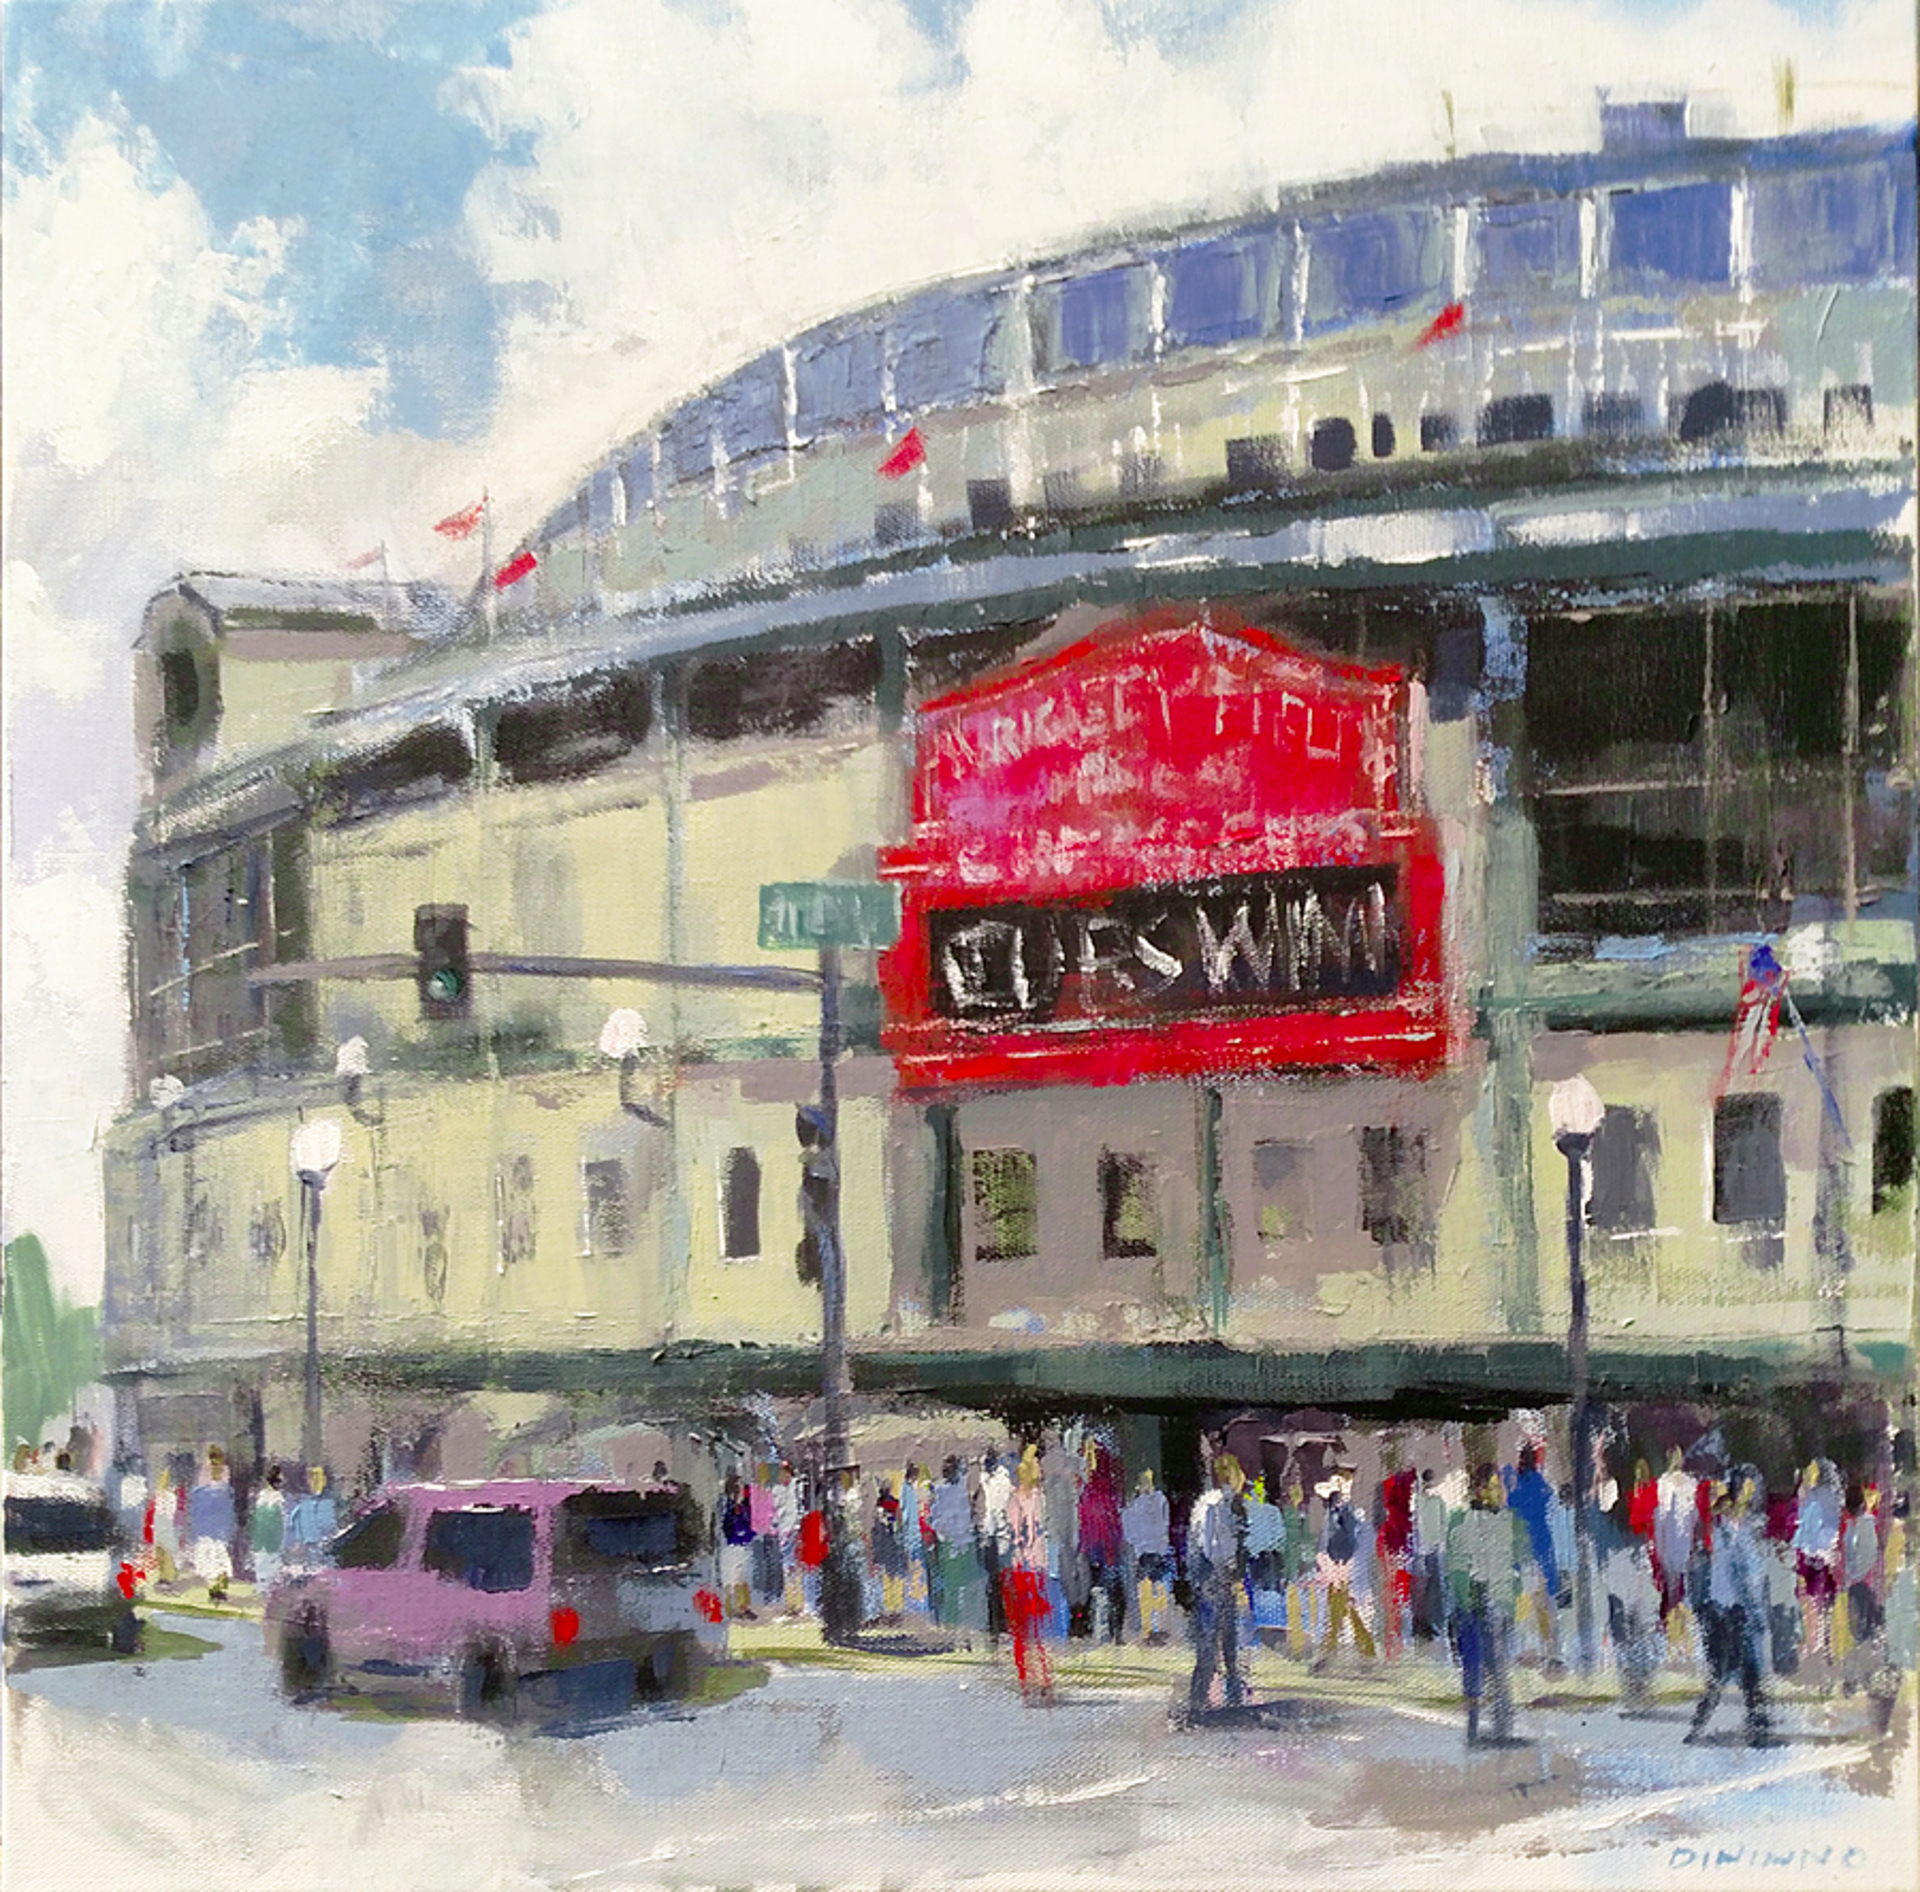 Cubs Win! by Steve Dininno